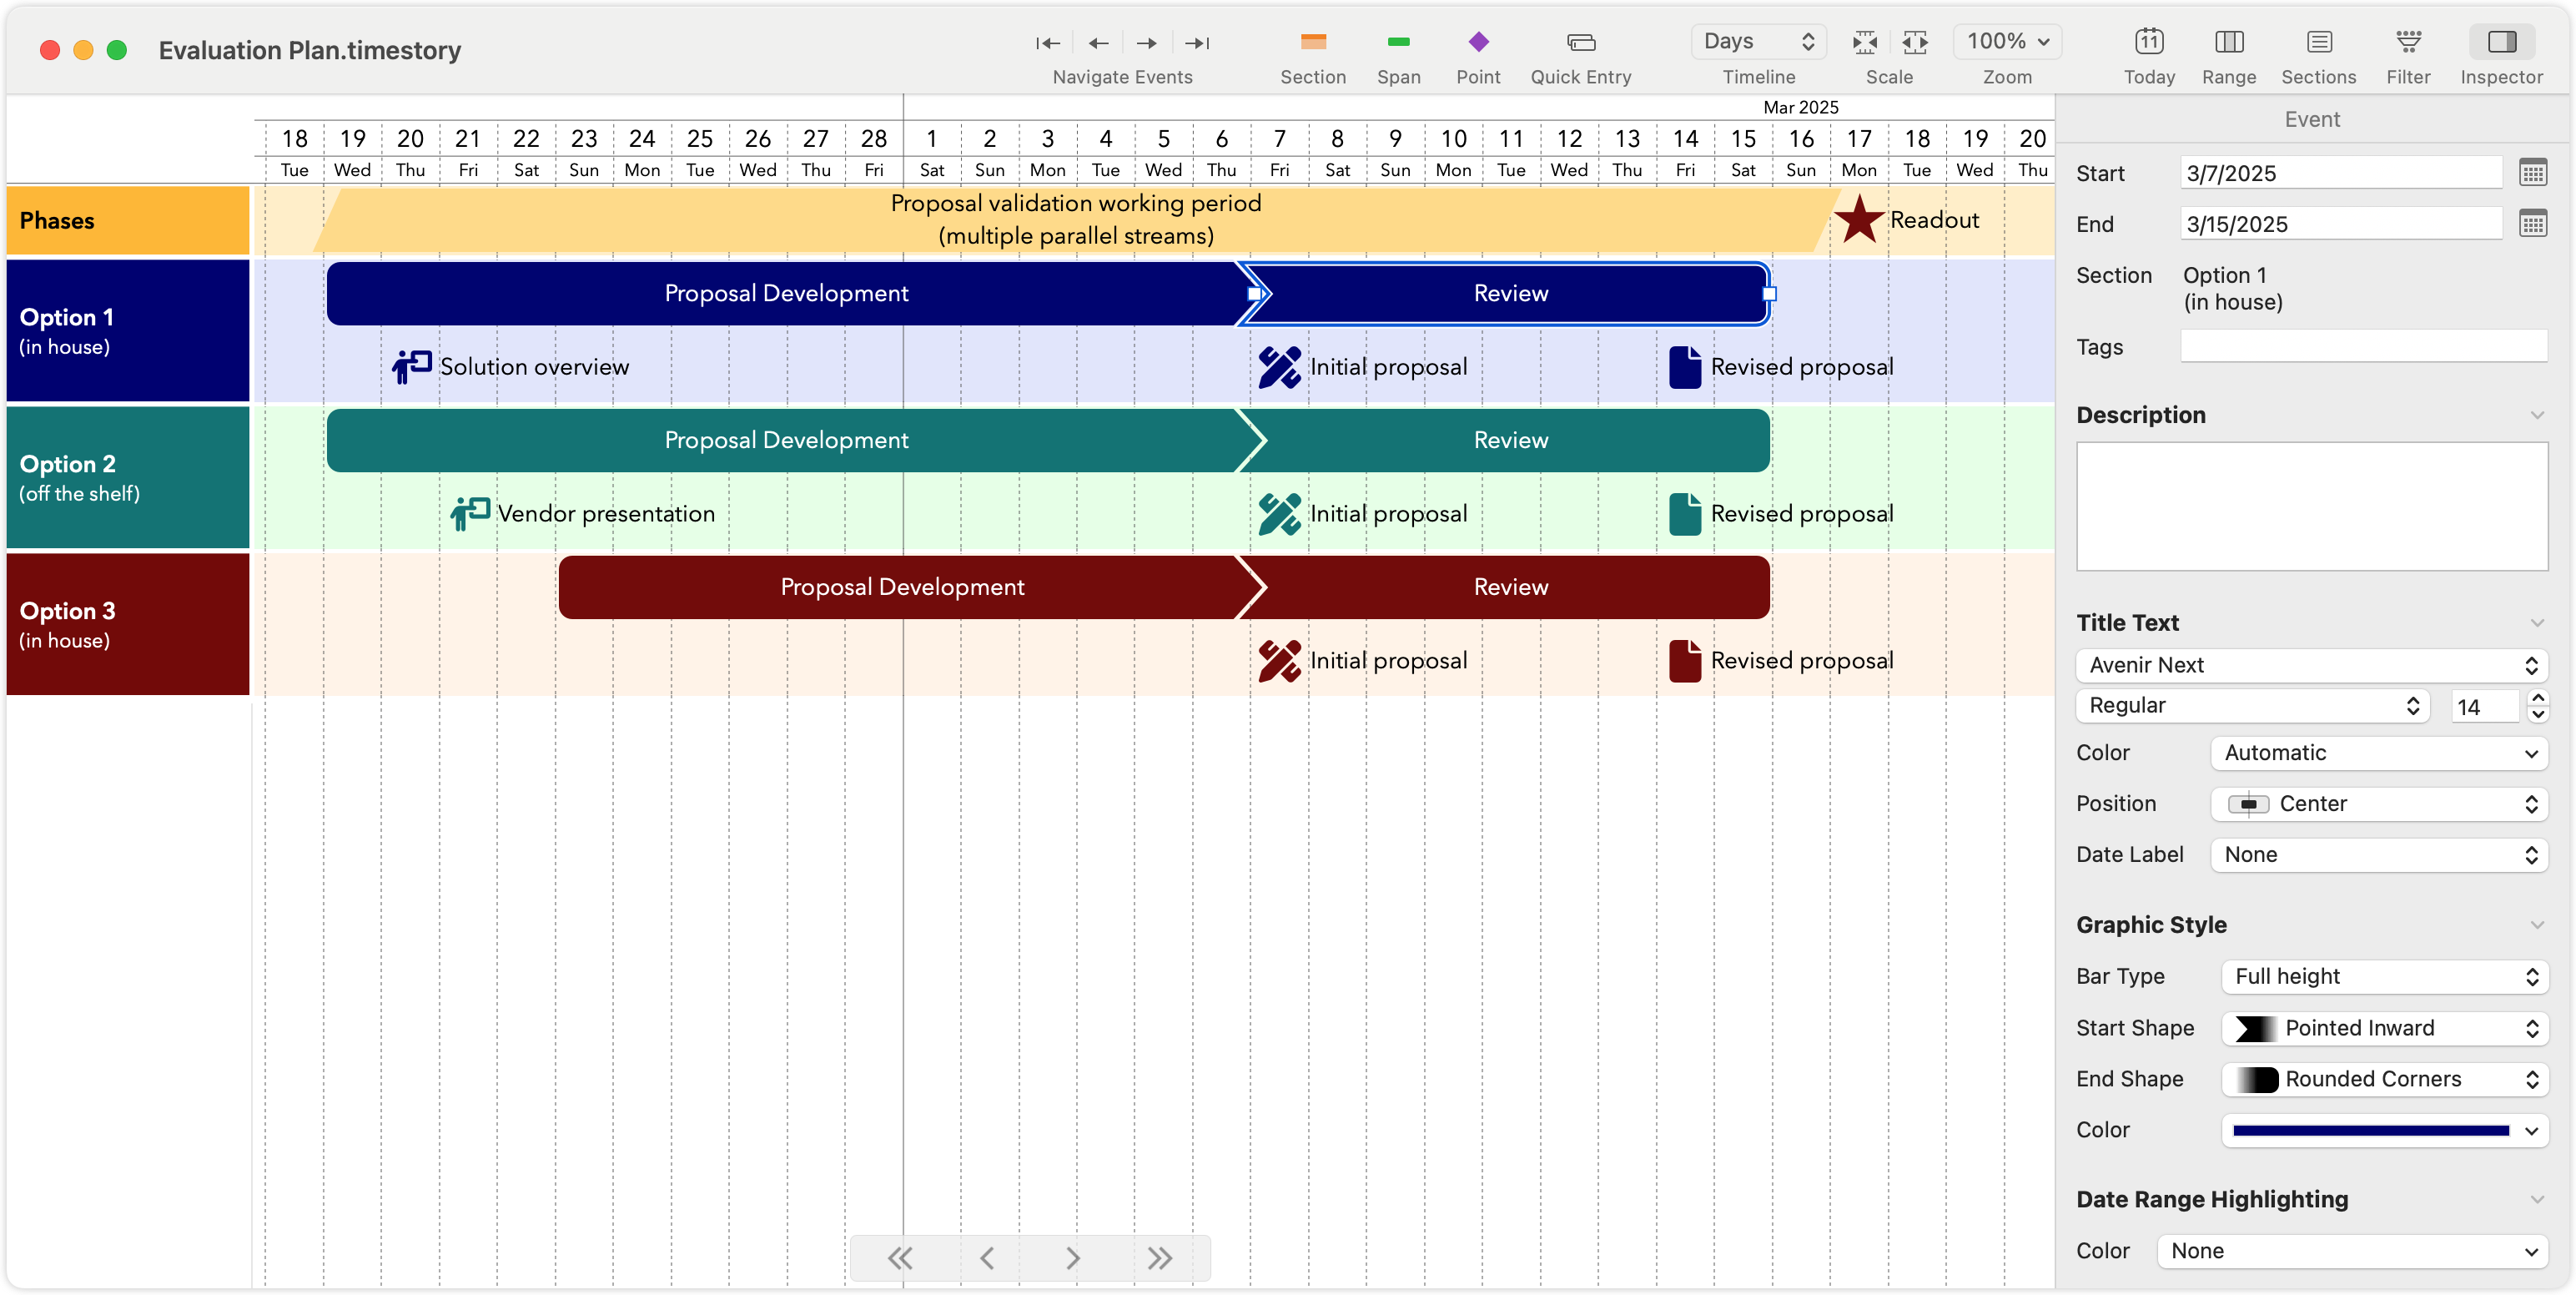 Screenshot of a TimeStory window on Mac, showing a fictional evaluation plan project timeline, which uses a mix of colors, shapes, and icons and has a customized timeline header with month, day, and day of week shown. The Inspector is also open, with an event selected, showcasing things like title font, text color, and event bar shape.